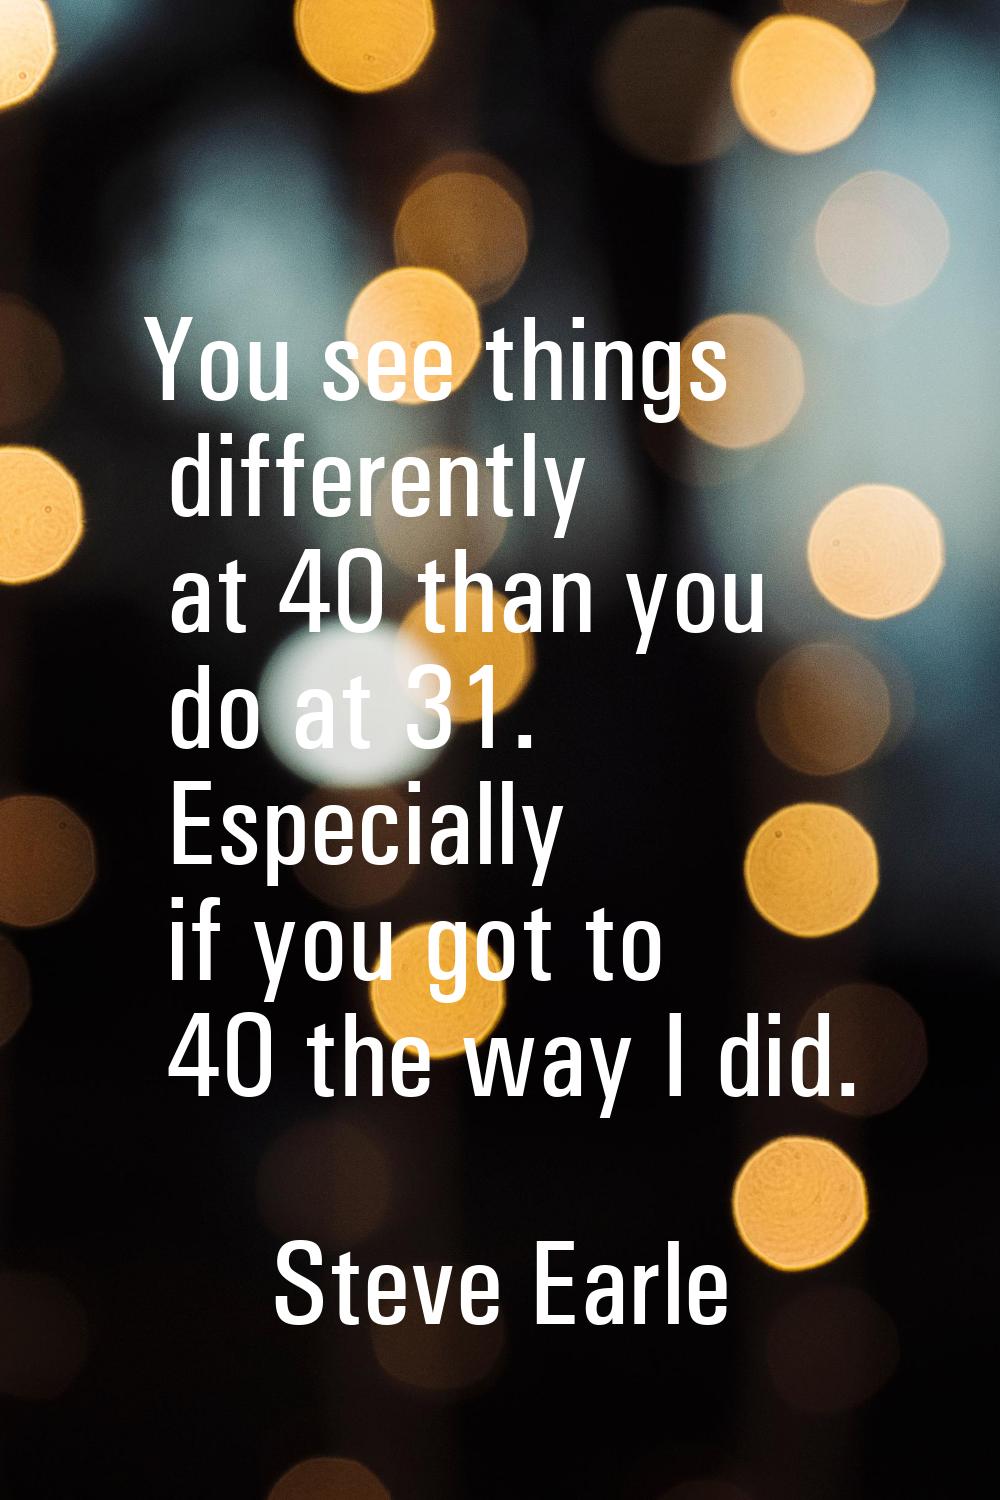 You see things differently at 40 than you do at 31. Especially if you got to 40 the way I did.